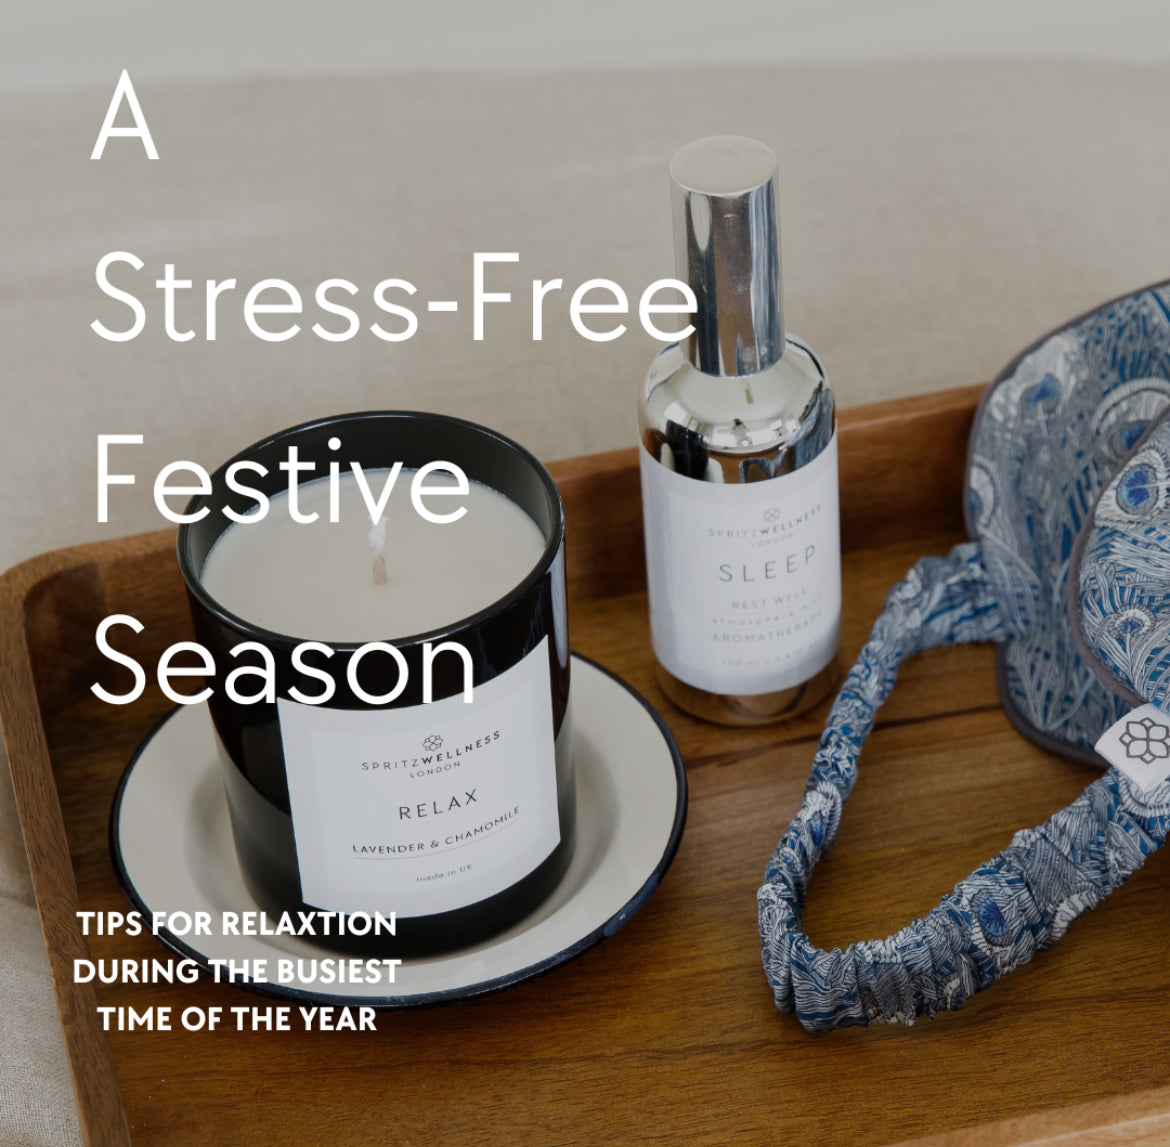 A Stress-Free Festive Season: Tips for Relaxation During the Busiest Time of the Year